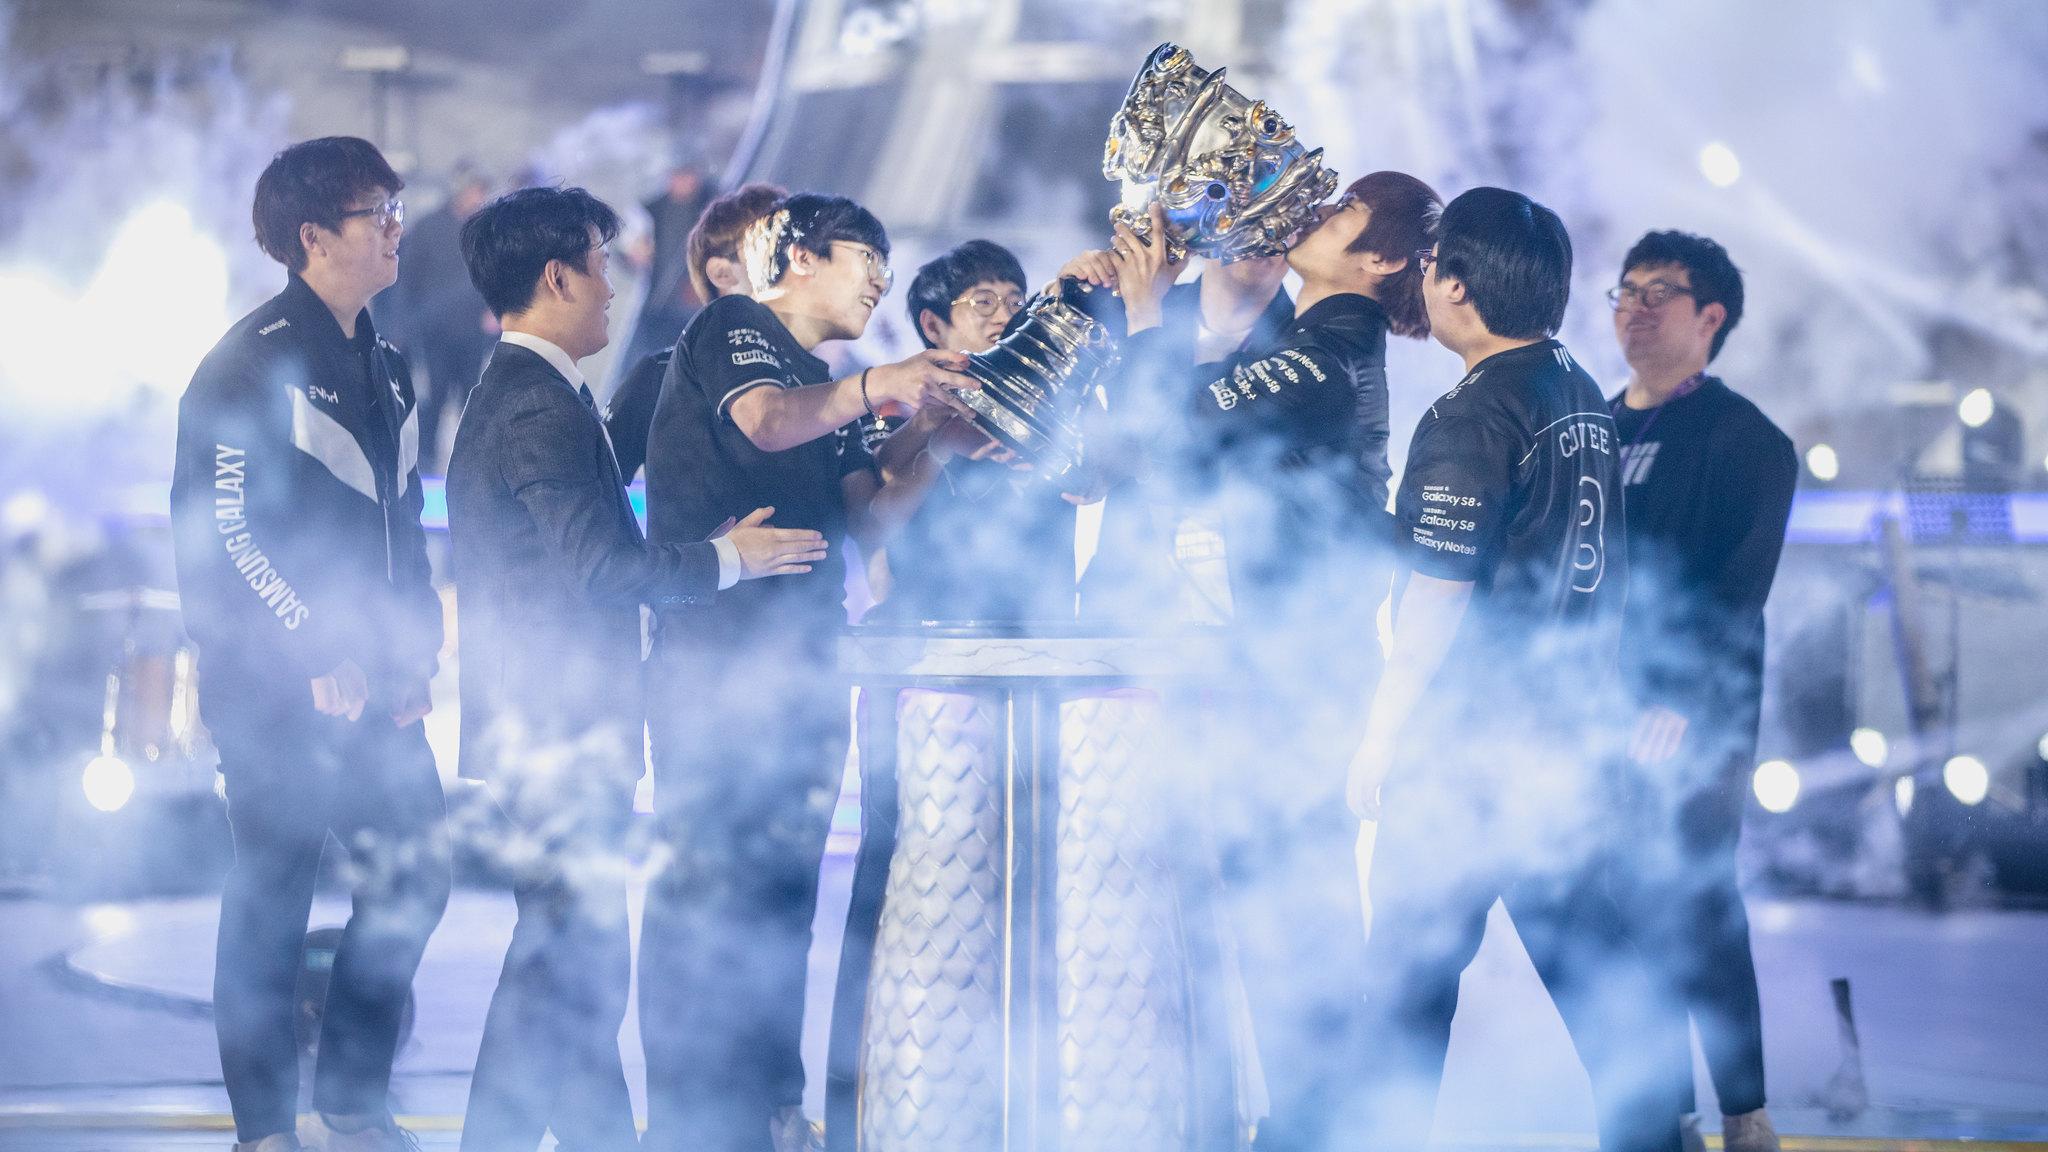 The Summoner's Cup is the ultimate prize in competitive League of Legends.